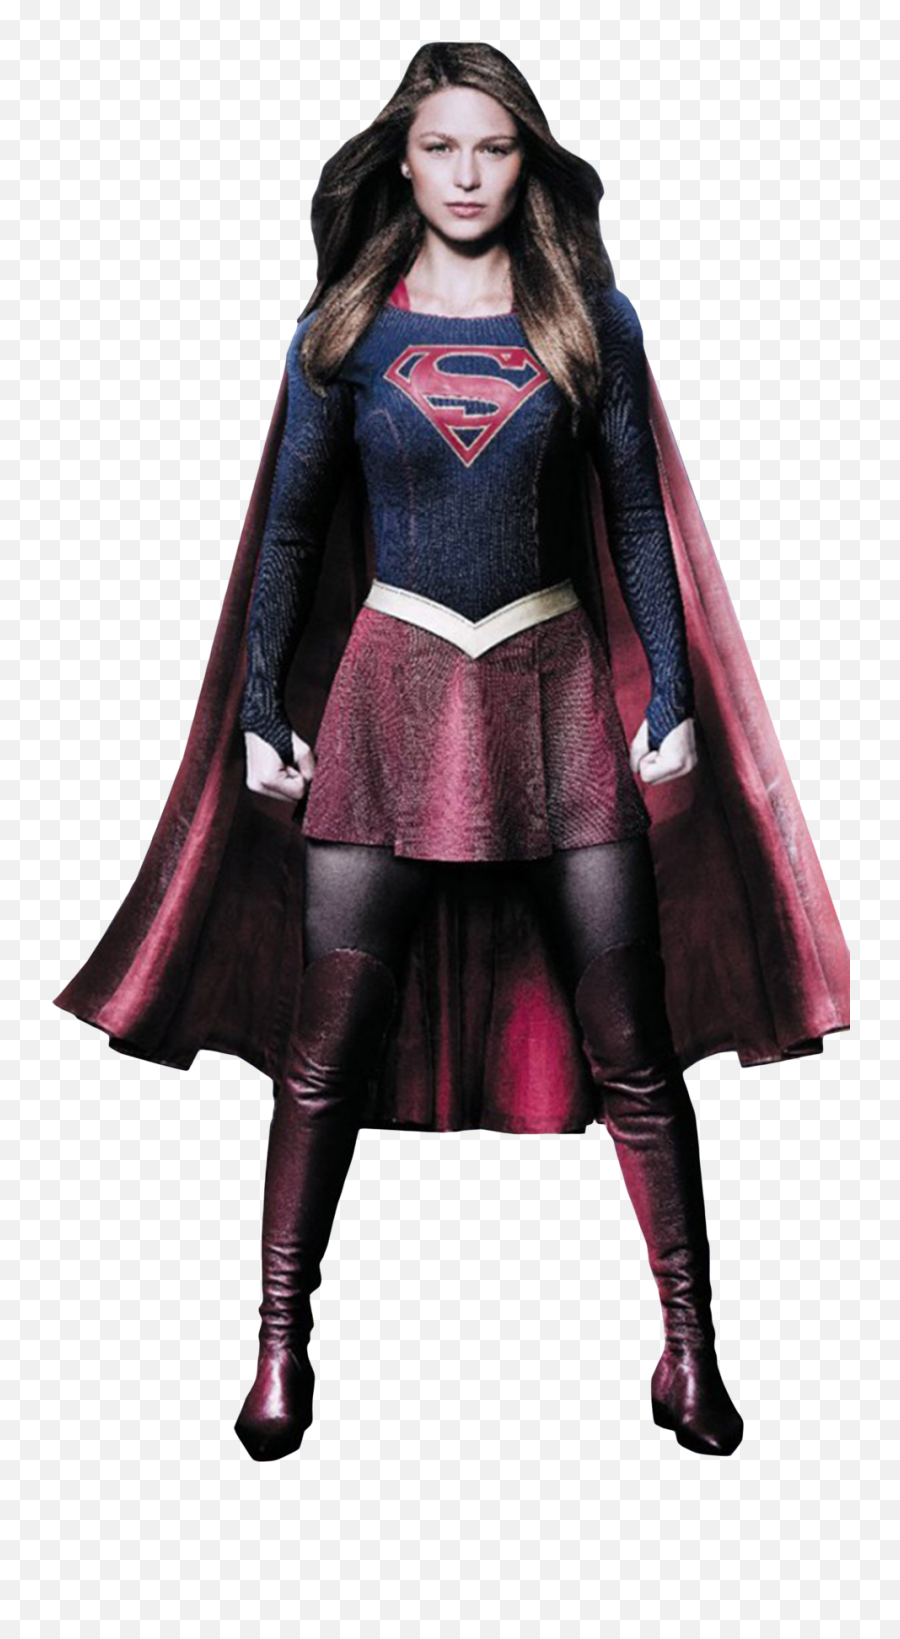 Supergirl Png Images Collection For Logo